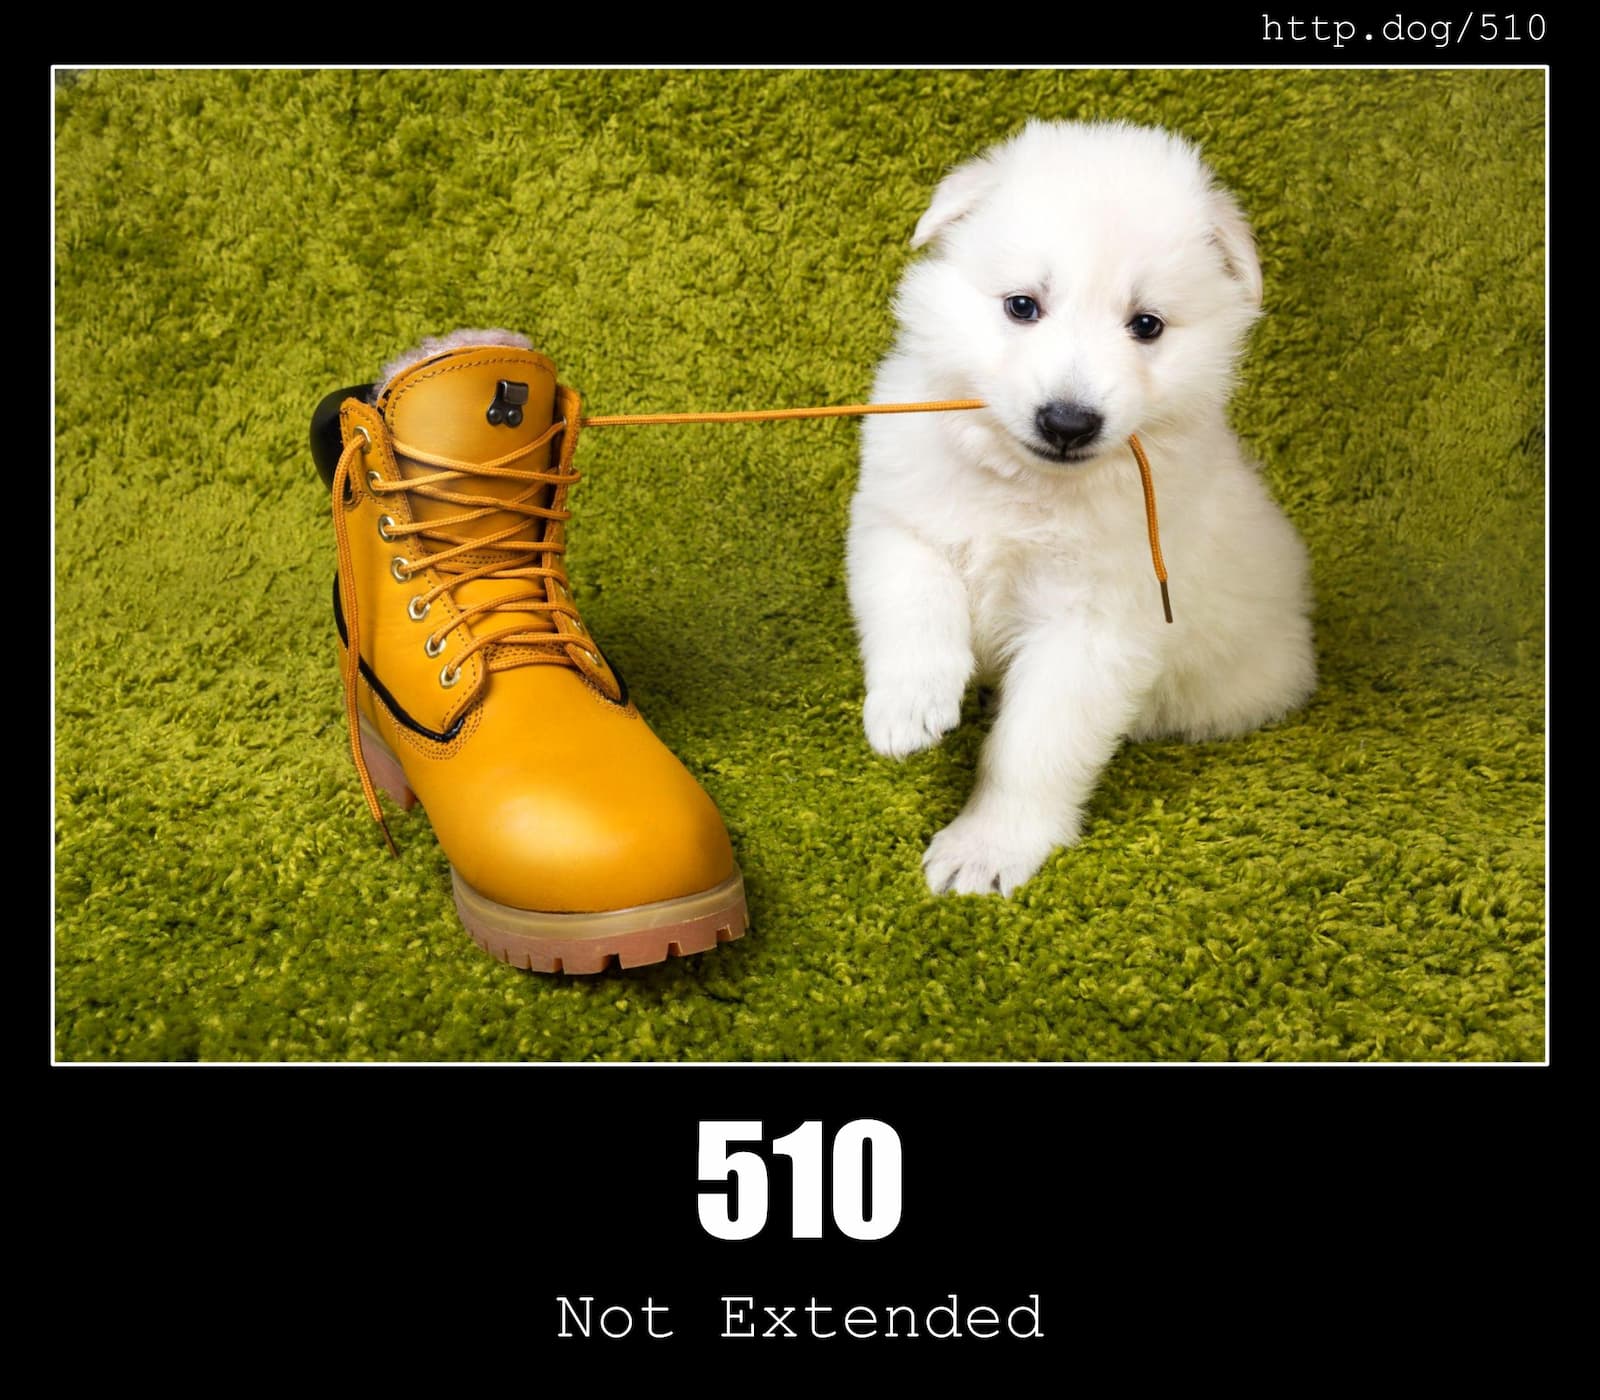 HTTP Status Code 510 Not Extended & Dogs